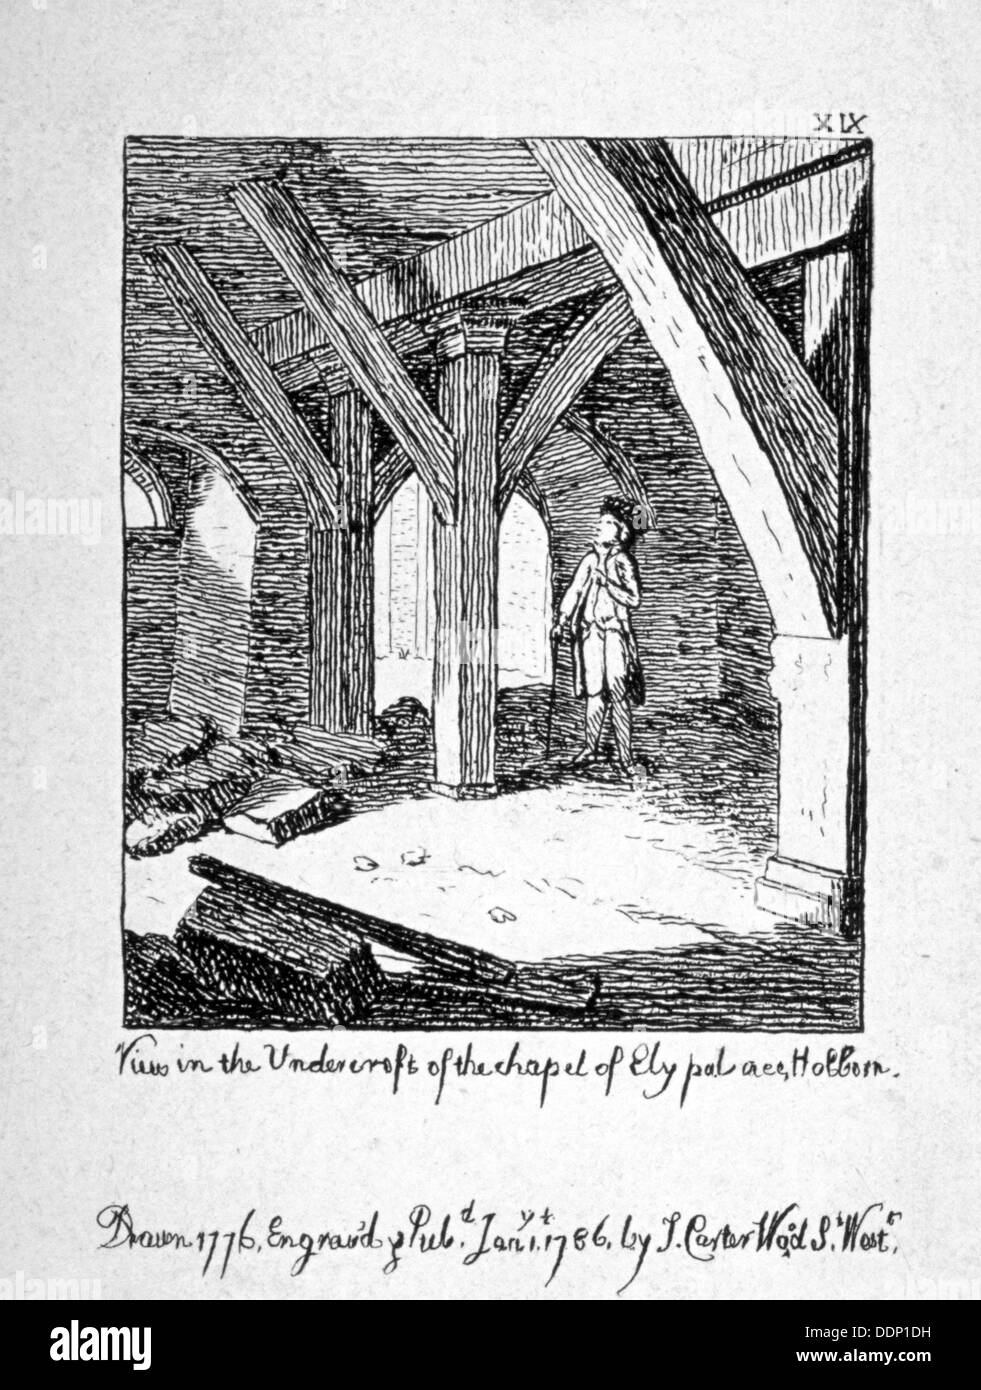 View in the undercroft of the Church of St Etheldreda, Ely Place, Holborn, London, 1786.    Artist: John Carter Stock Photo